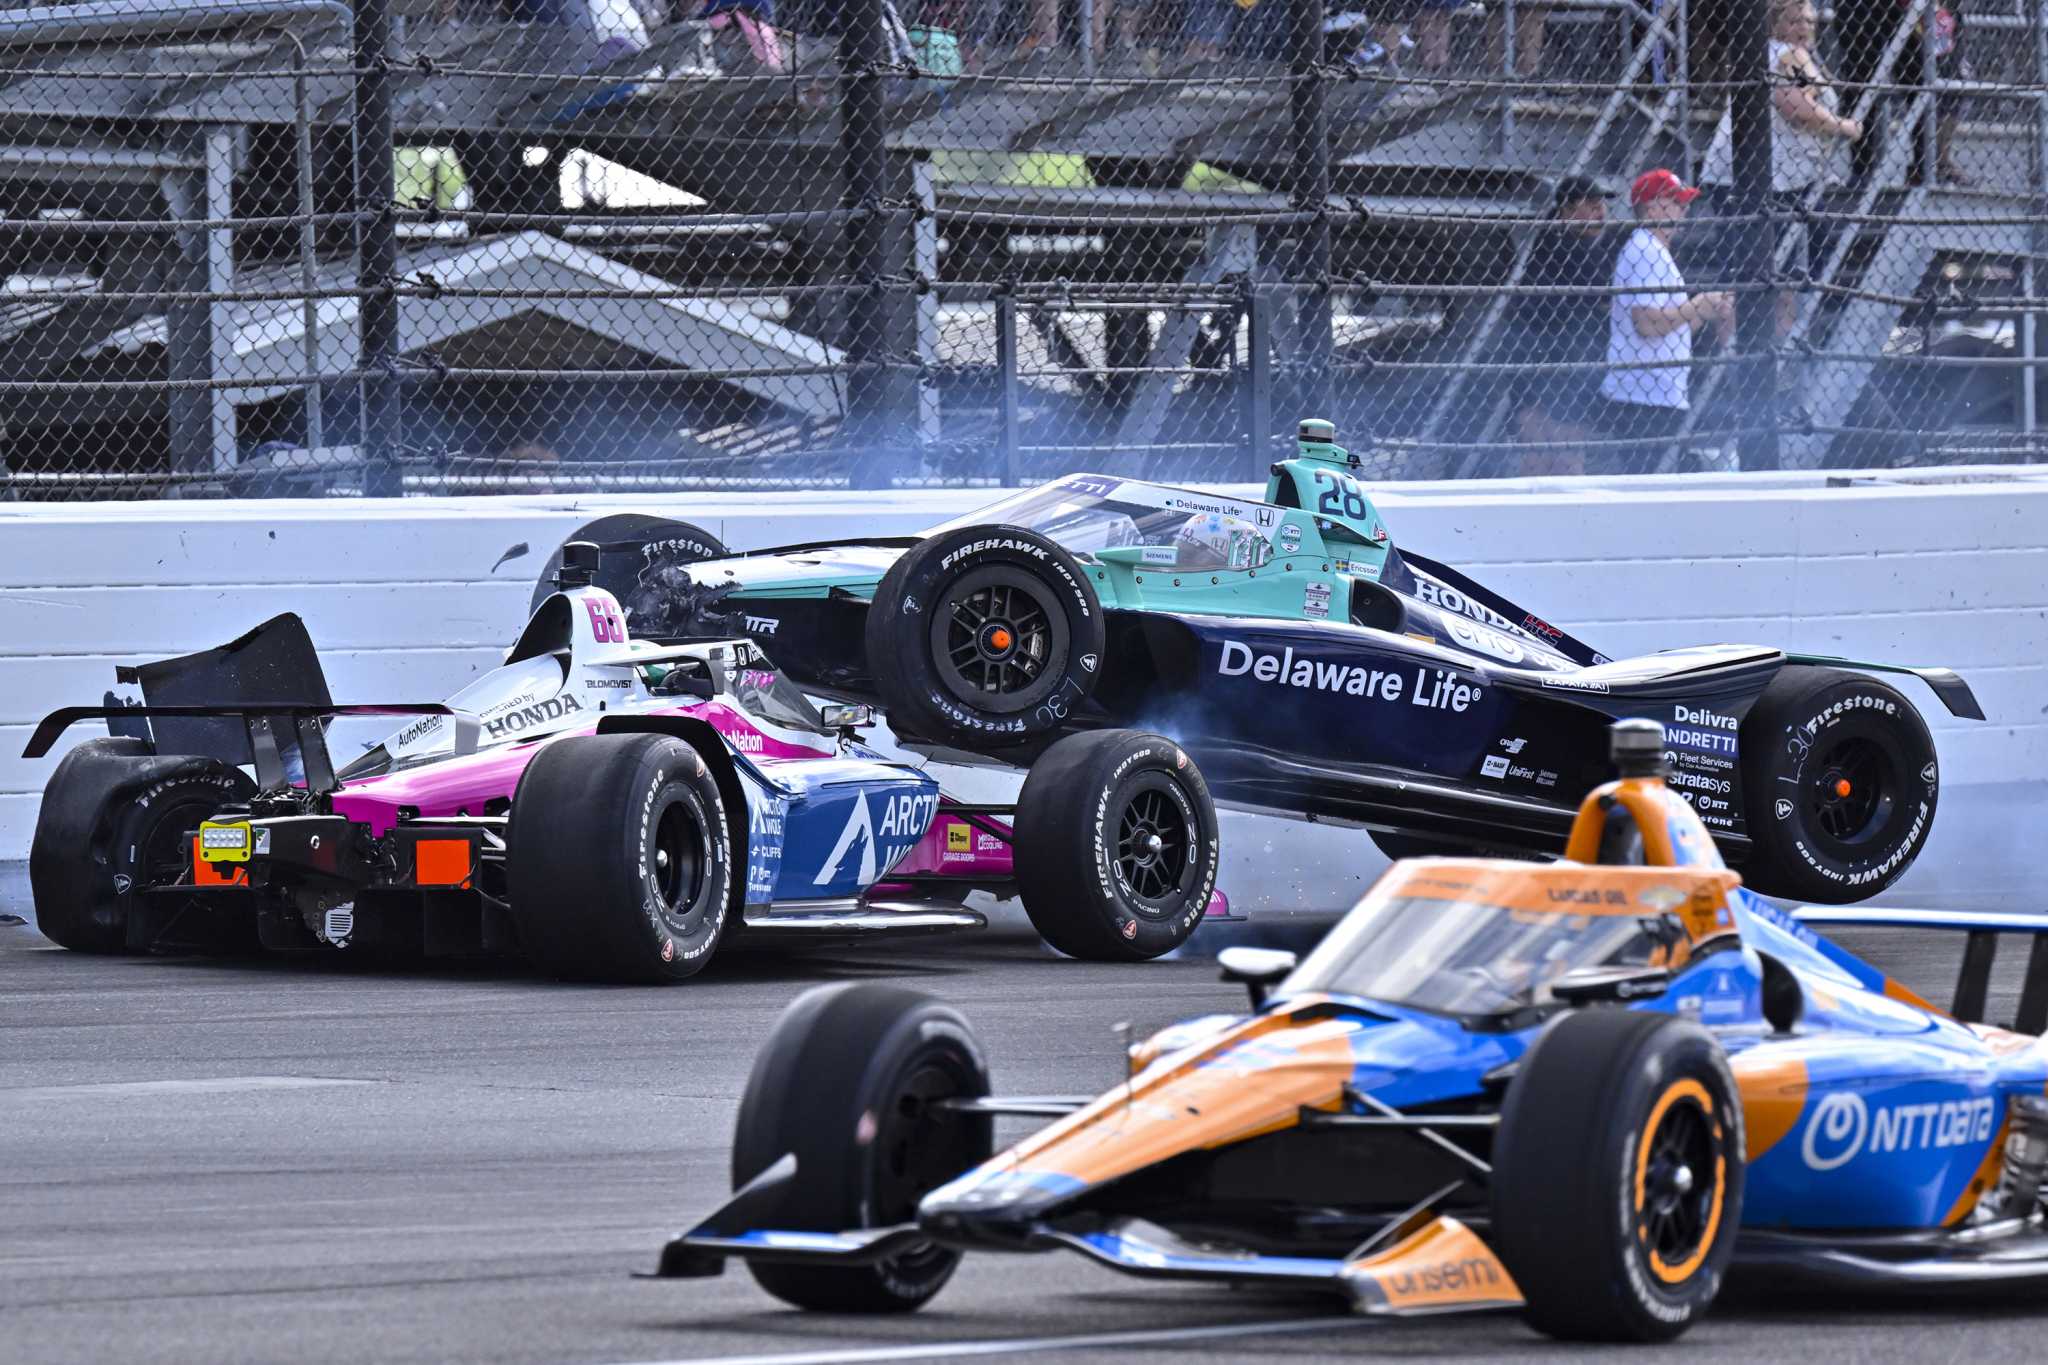 Tom Blomqvist benched for next 2 races following opening lap crash at Indianapolis 500